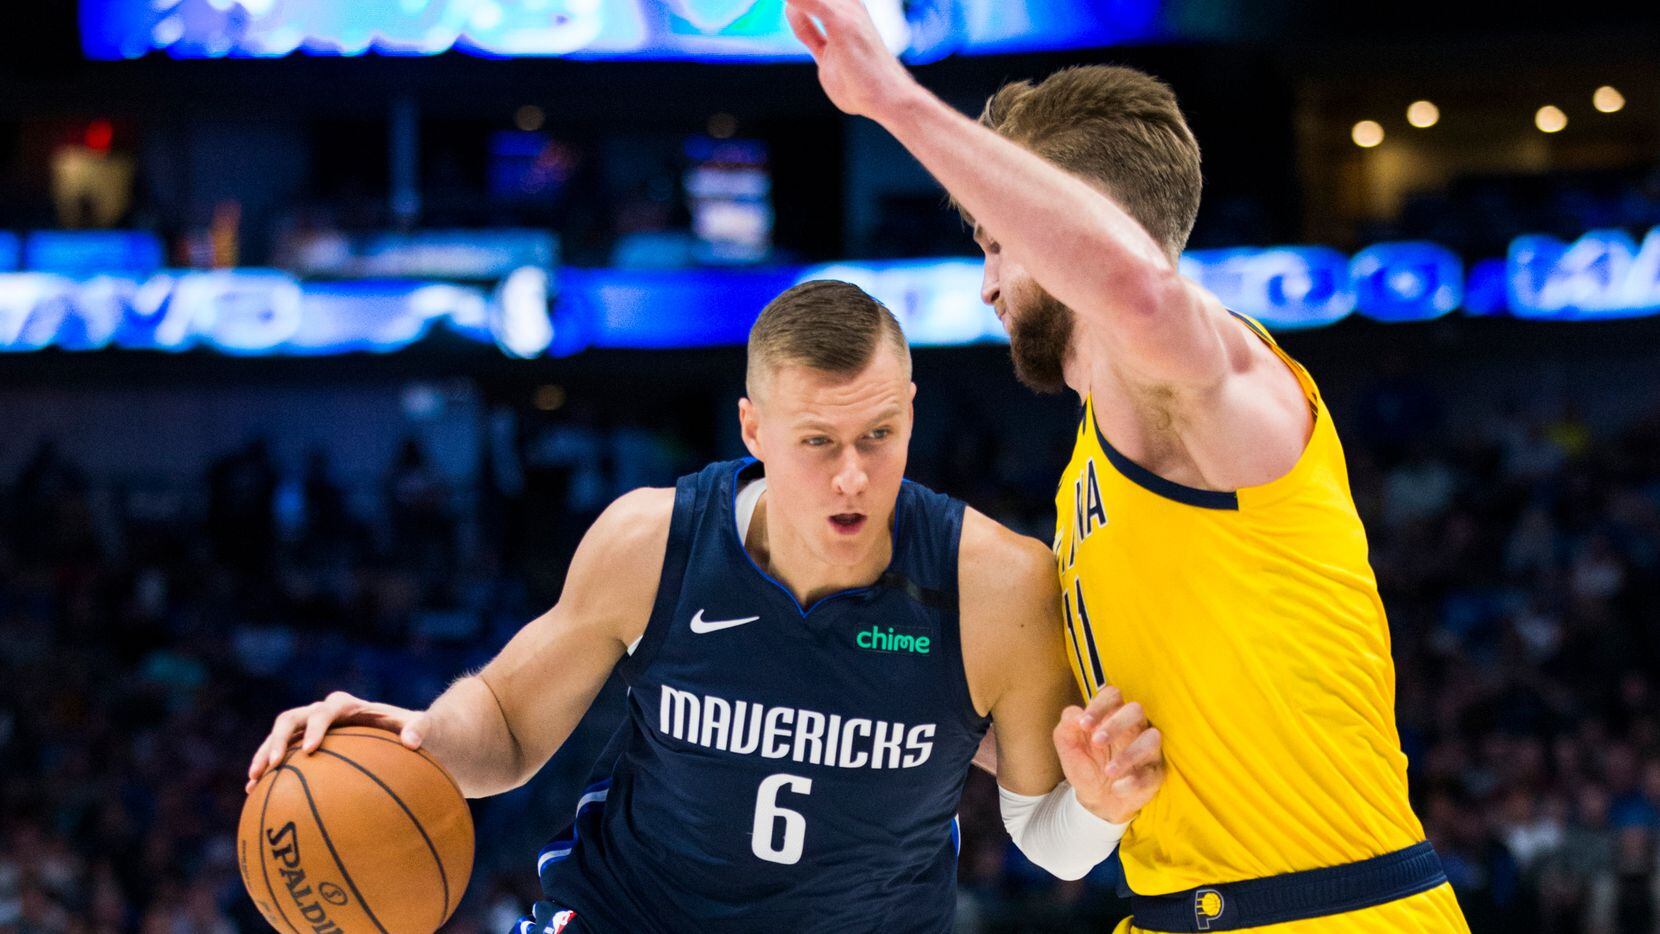 Dallas Mavericks forward Kristaps Porzingis (6) gets past Indiana Pacers forward Domantas Sabonis (11) during the second quarter of an NBA game between the Indiana Pacers and the Dallas Mavericks on Sunday, March 8, 2020 at American Airlines Center in Dallas.